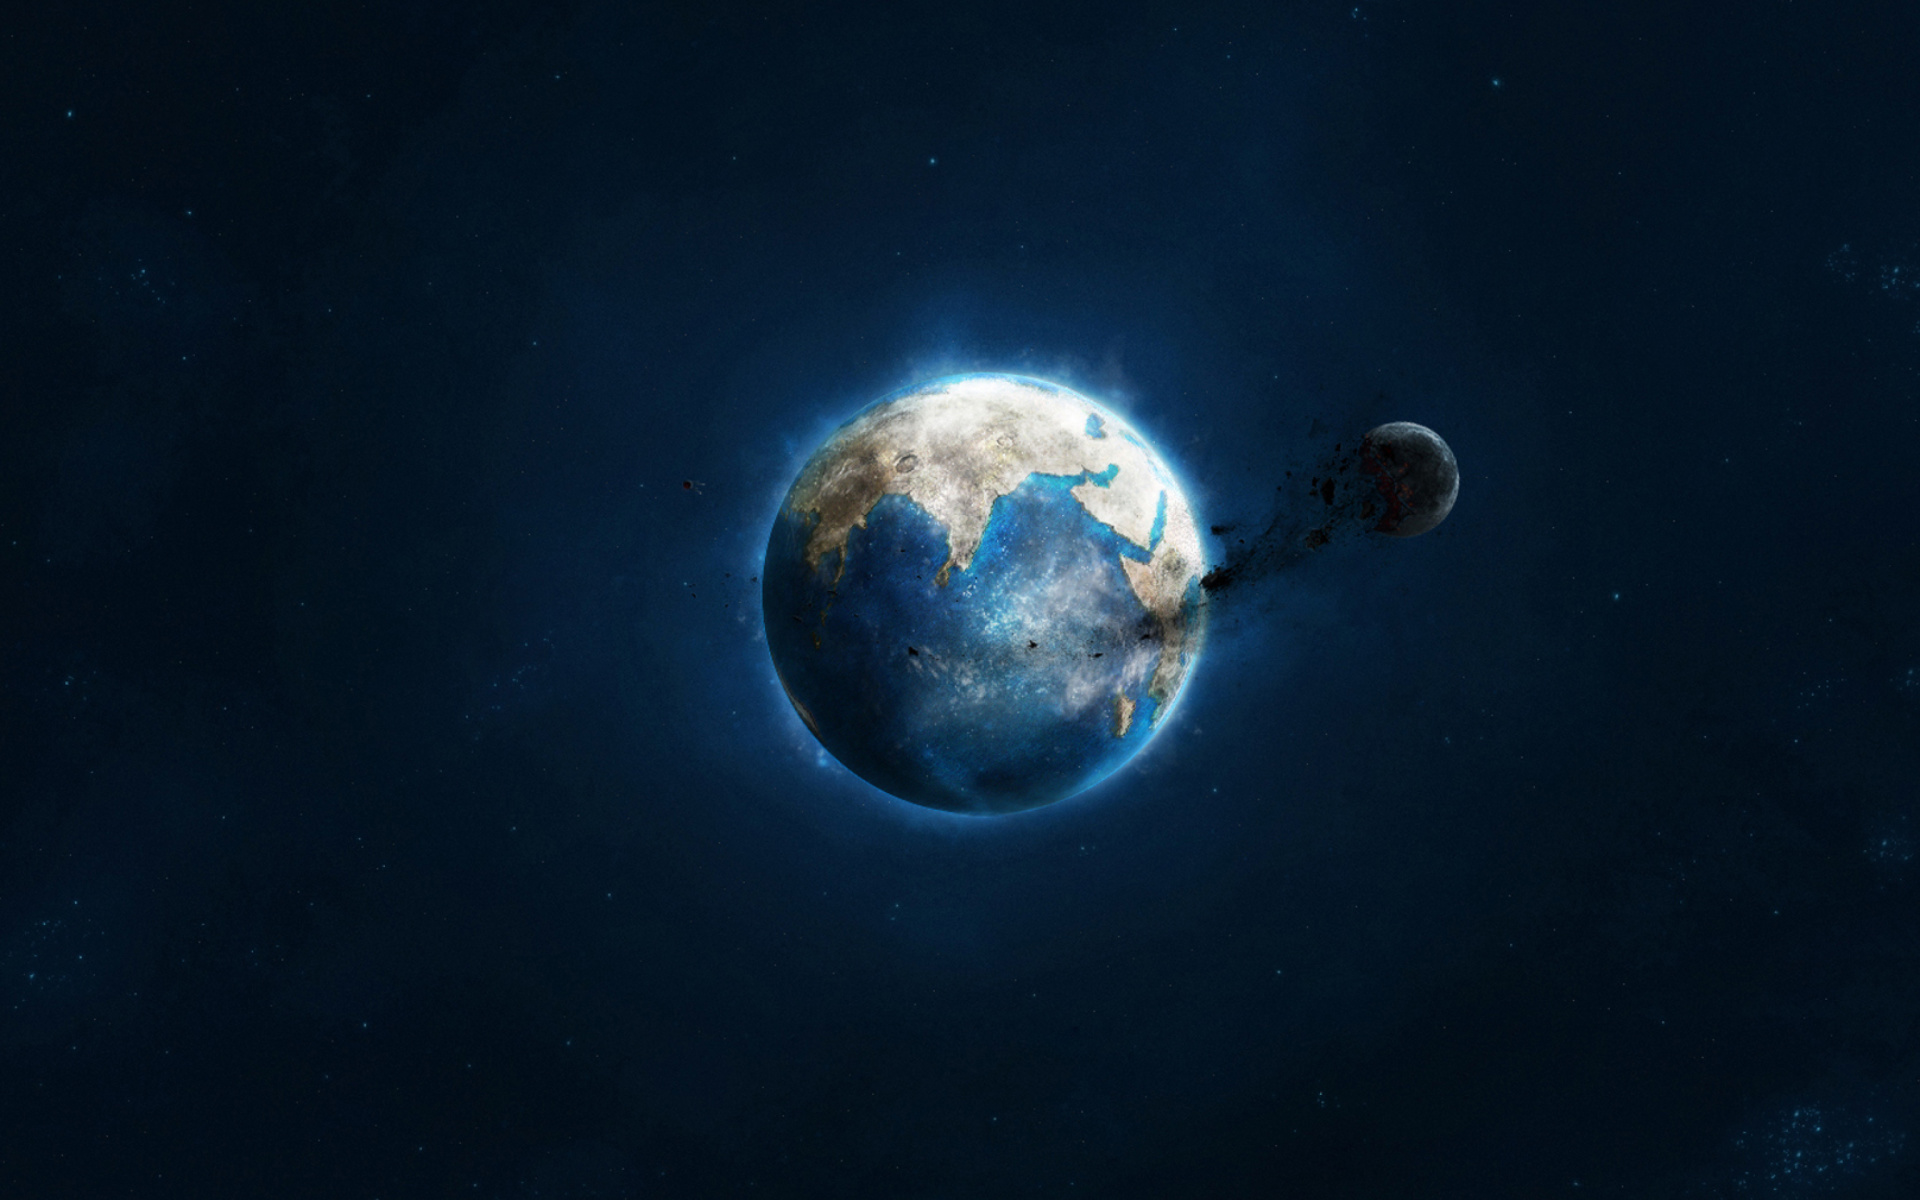 Planet and Asteroid wallpaper 1920x1200